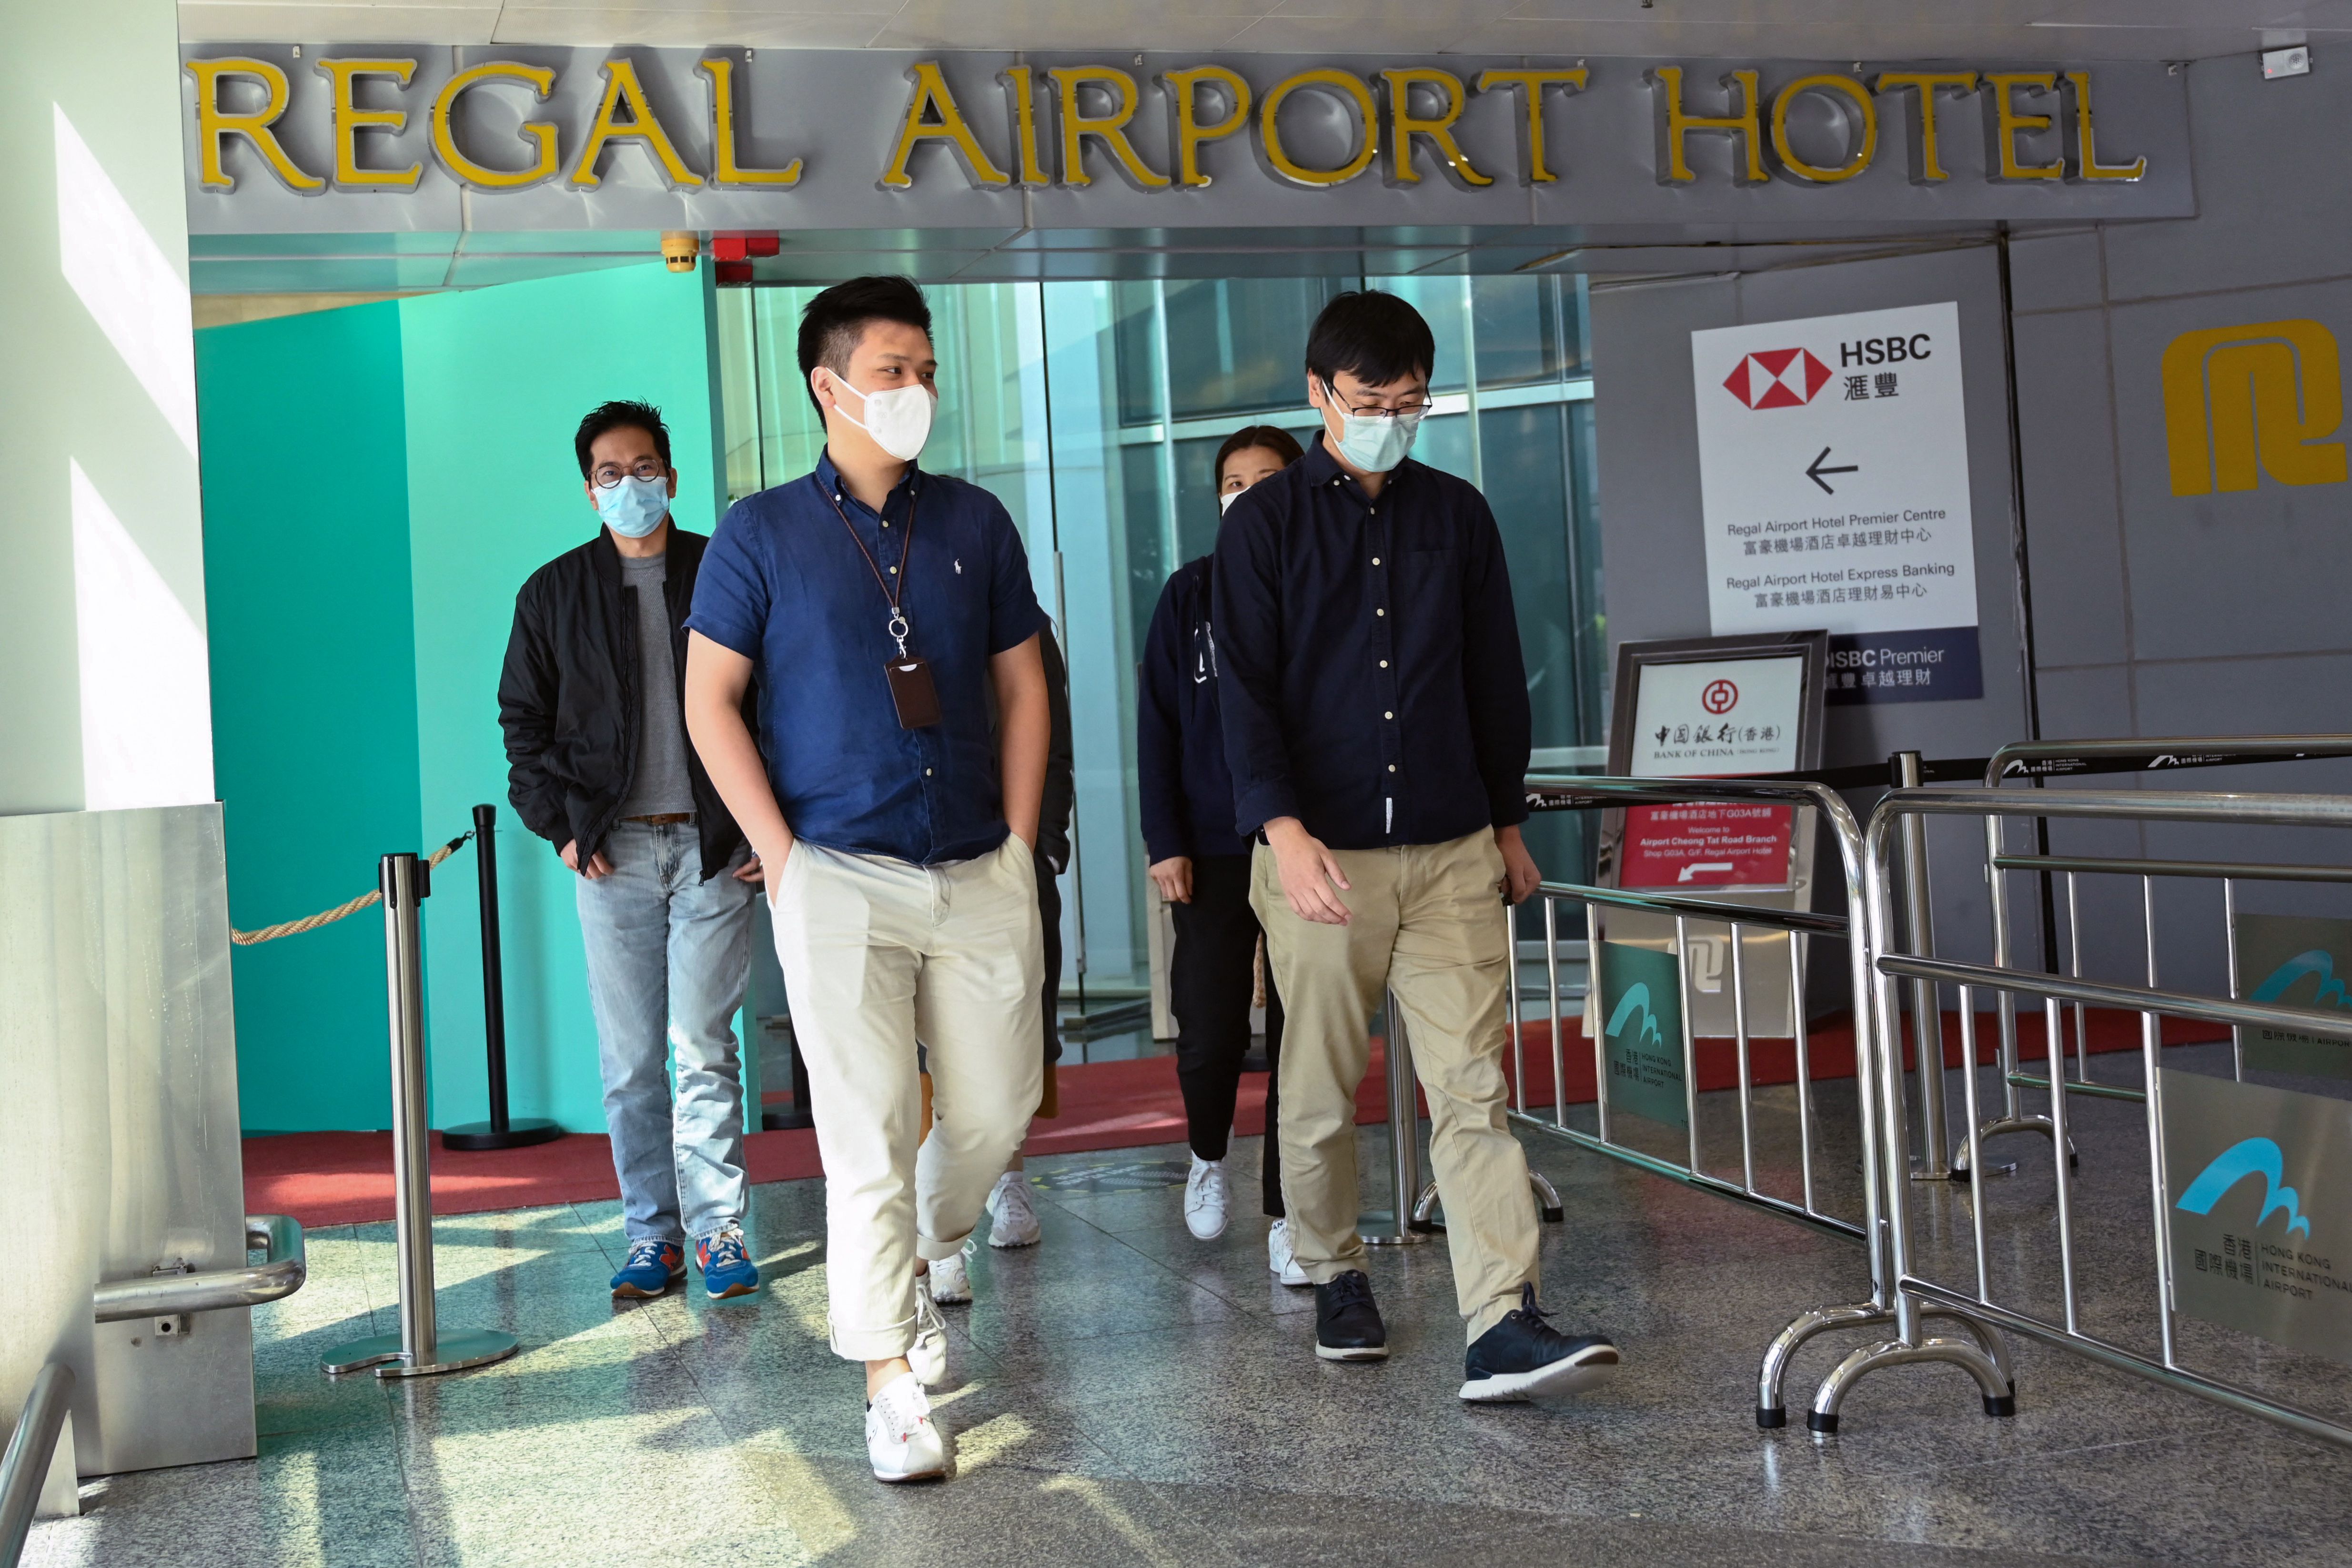 People leave the Regal Airport Hotel at Chek Lap Kok airport in Hong Kong on November 26, 2021, where a new Covid-19 variant deemed a 'major threat' was detected in a traveller from South Africa.